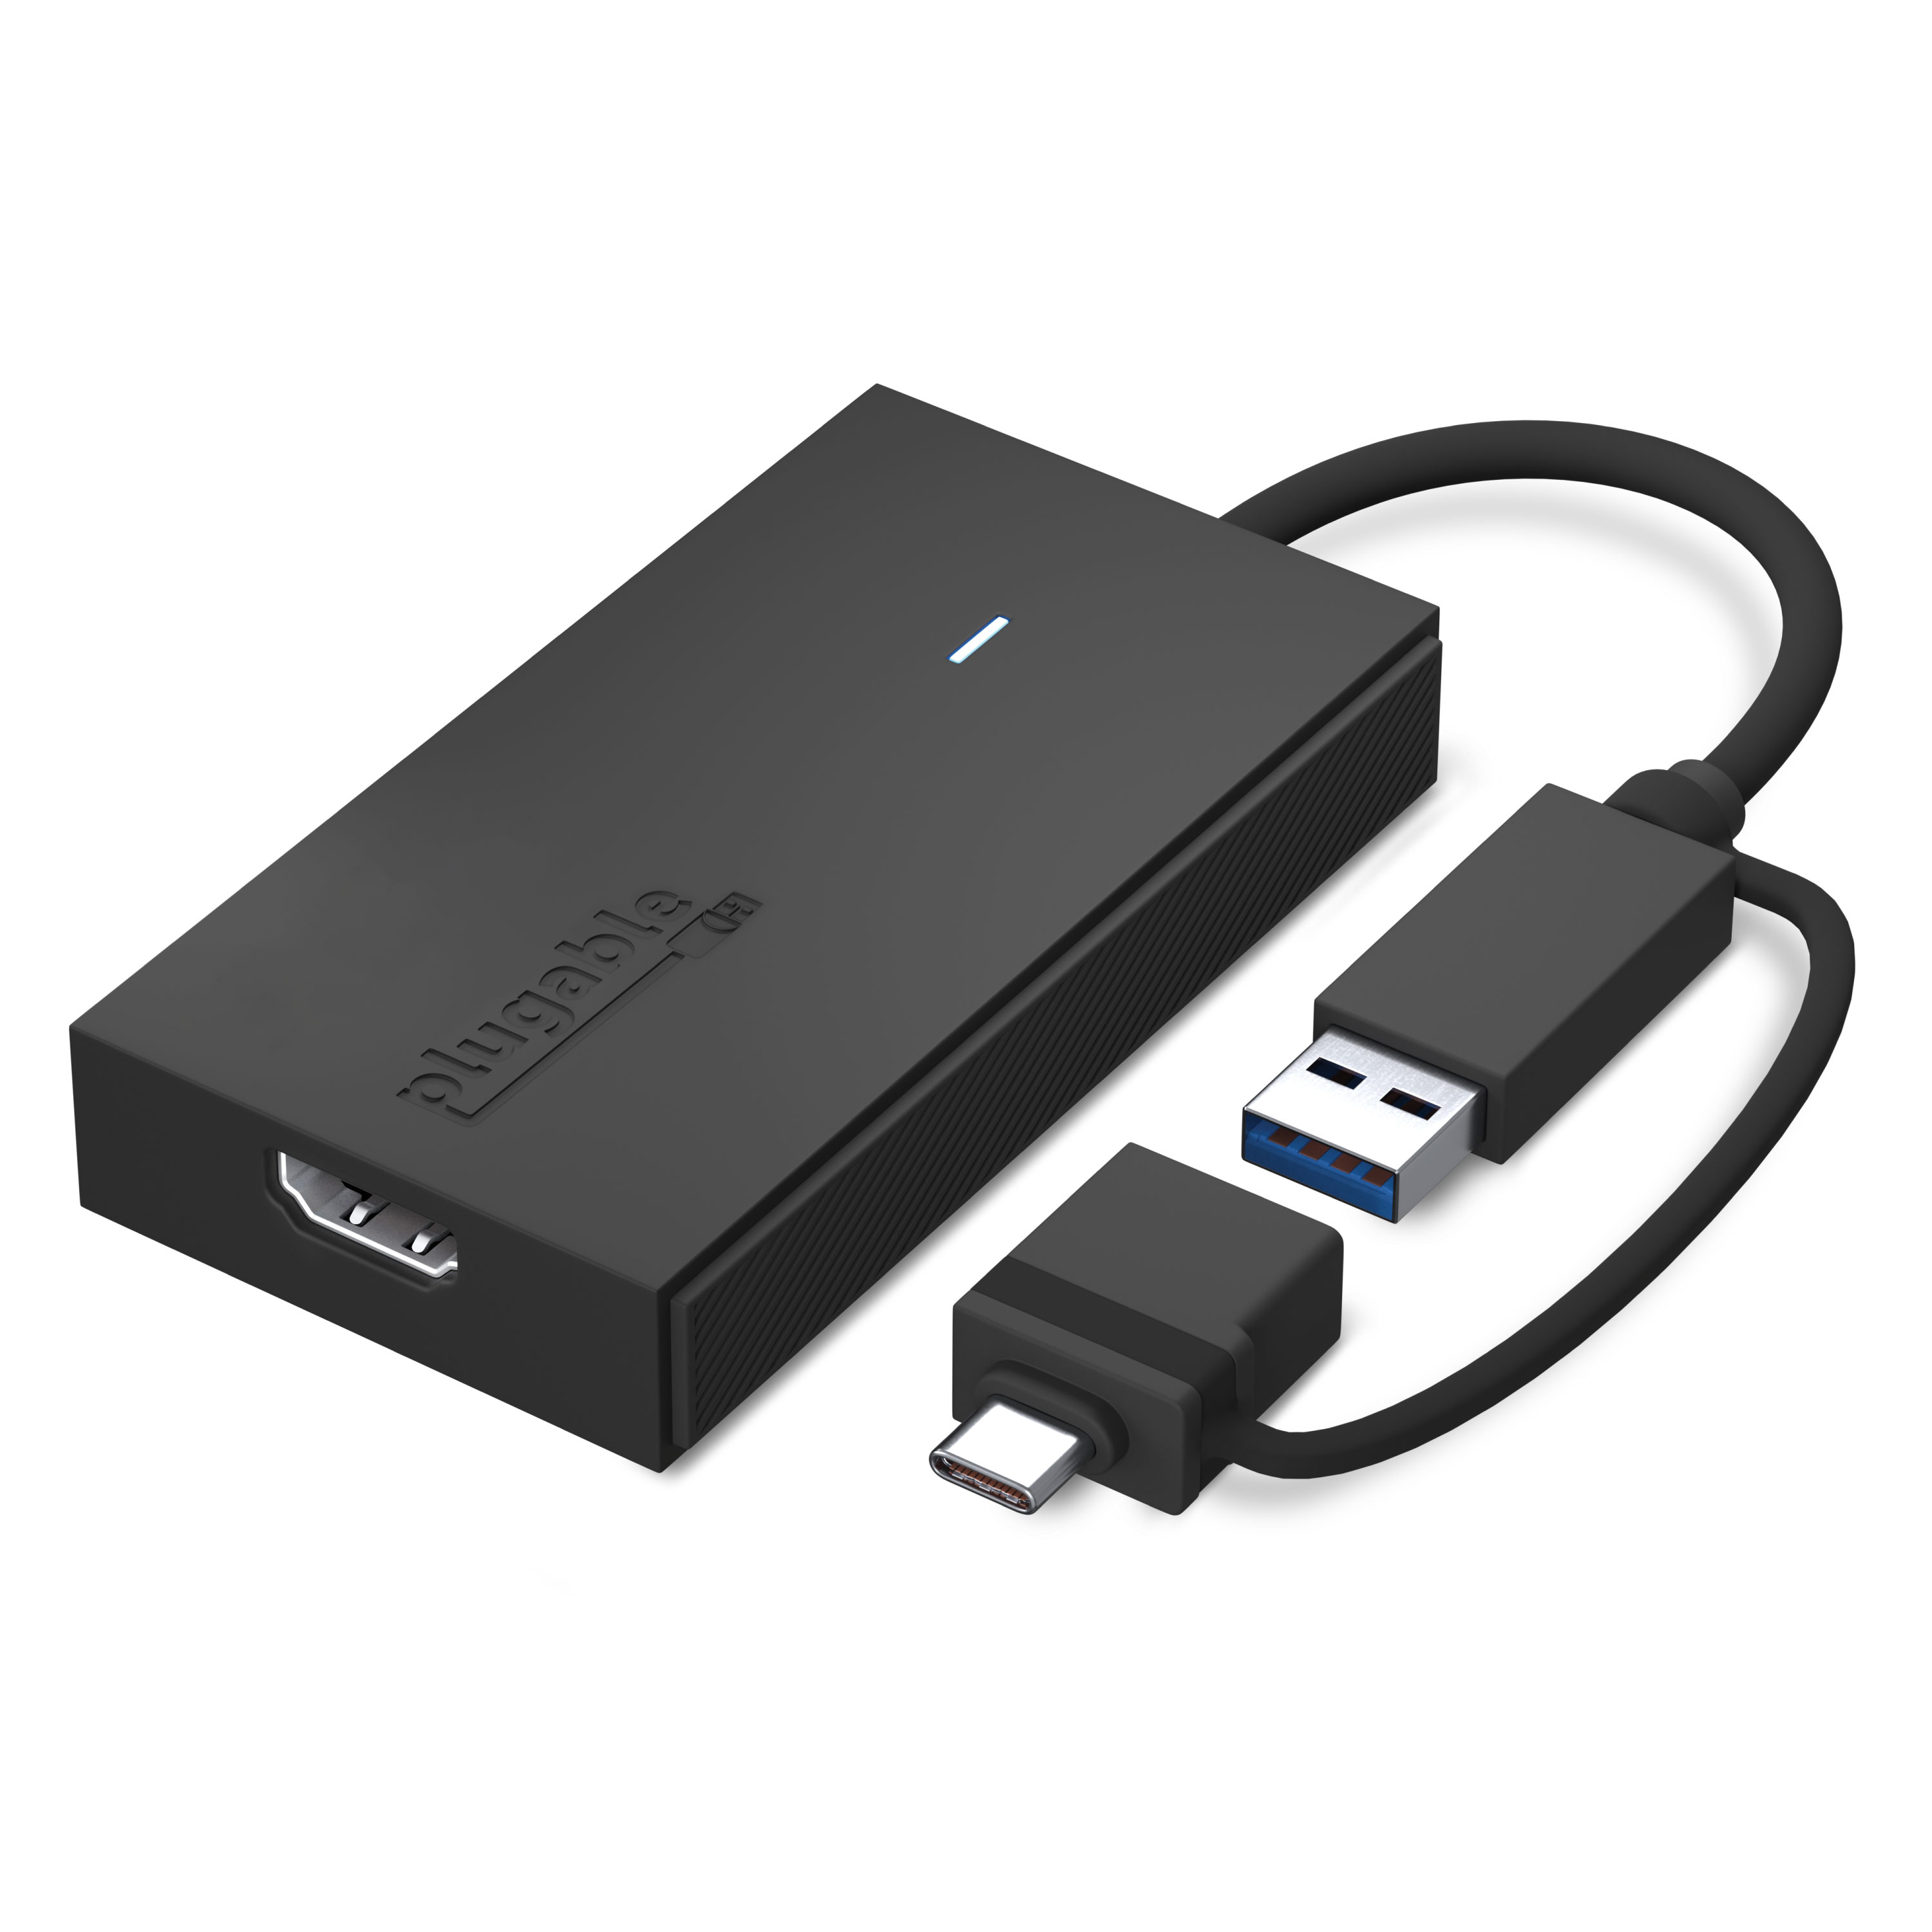 Plugable USB C to HDMI Adapter, Universal Video Graphics Adapter for USB 3.0 and USB-C Macs and Windows, Extend an HDMI Monitor up to 1080p@60Hz - image 1 of 7